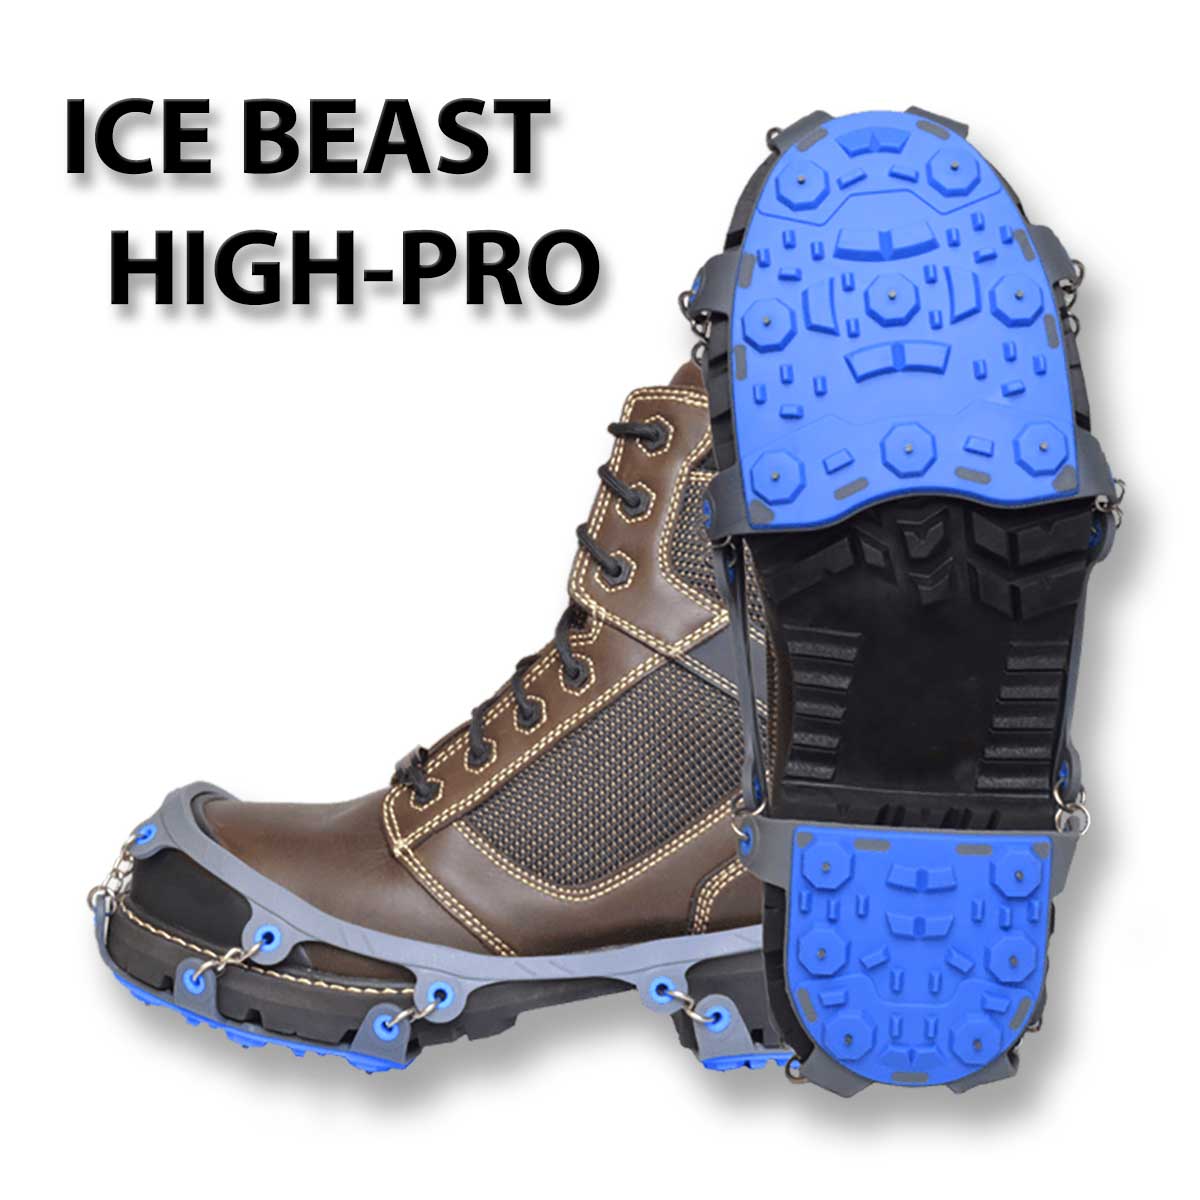 Winter Walking ICE BEAST HIGH-PRO Ice Cleats for Shoes and Boots